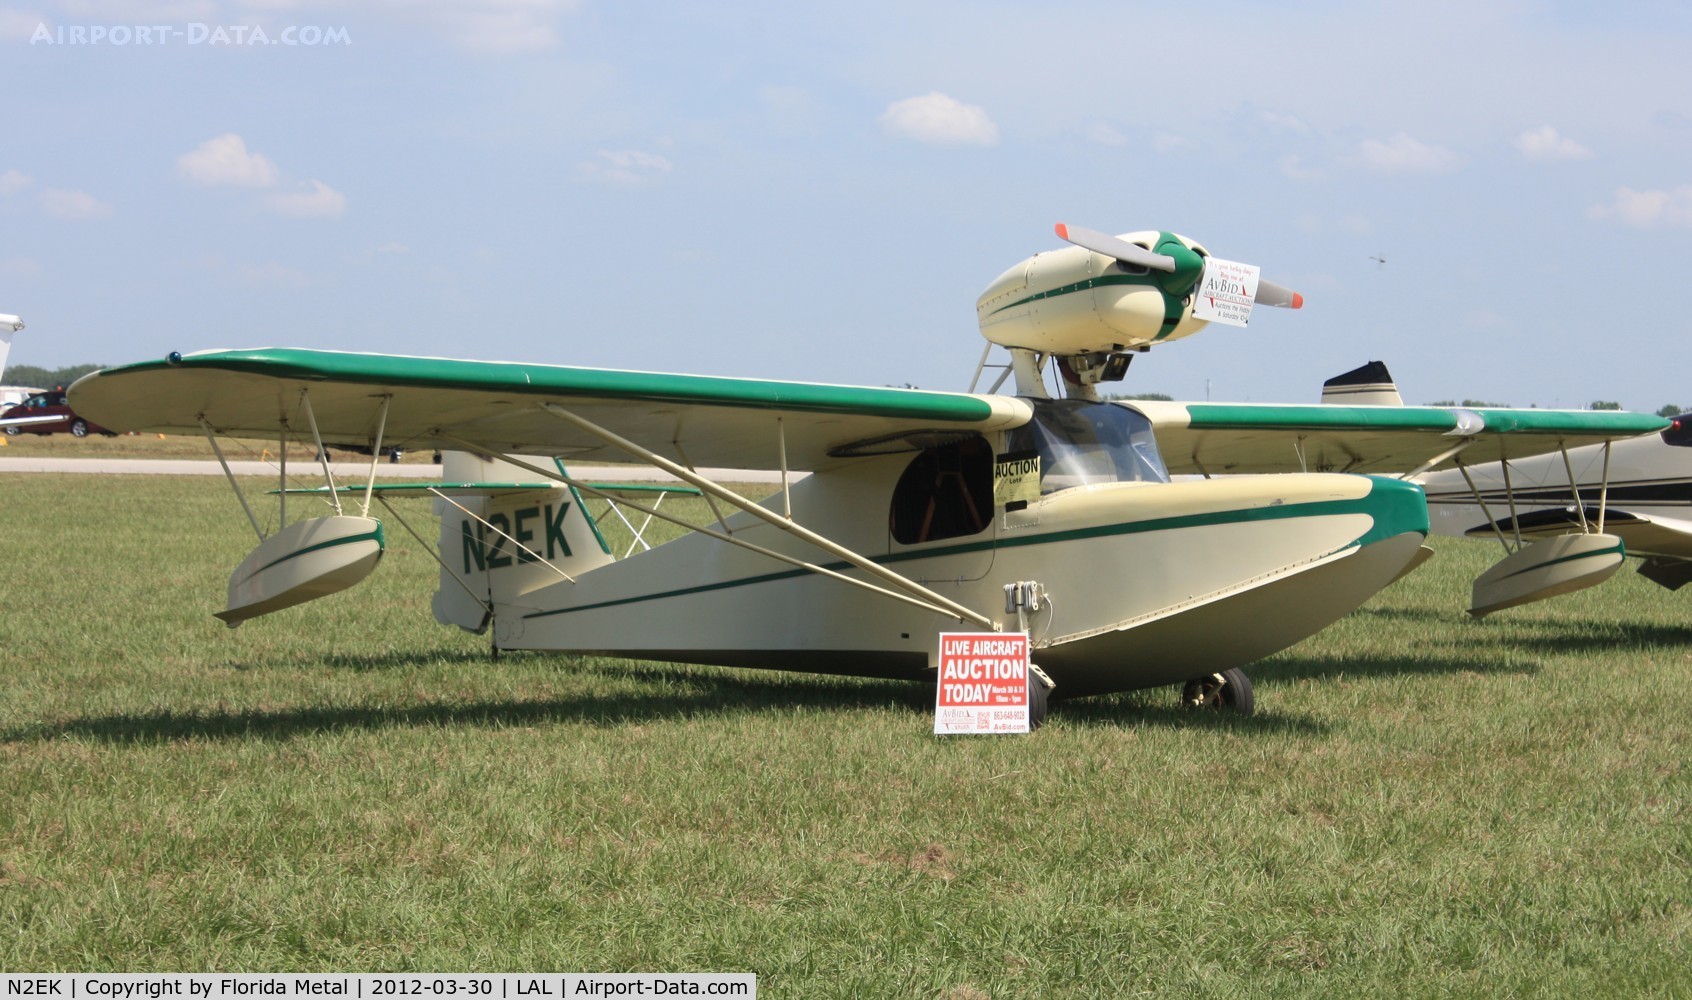 N2EK, 1975 Anderson Kingfisher C/N 84, Kingfisher museum piece up for auction?